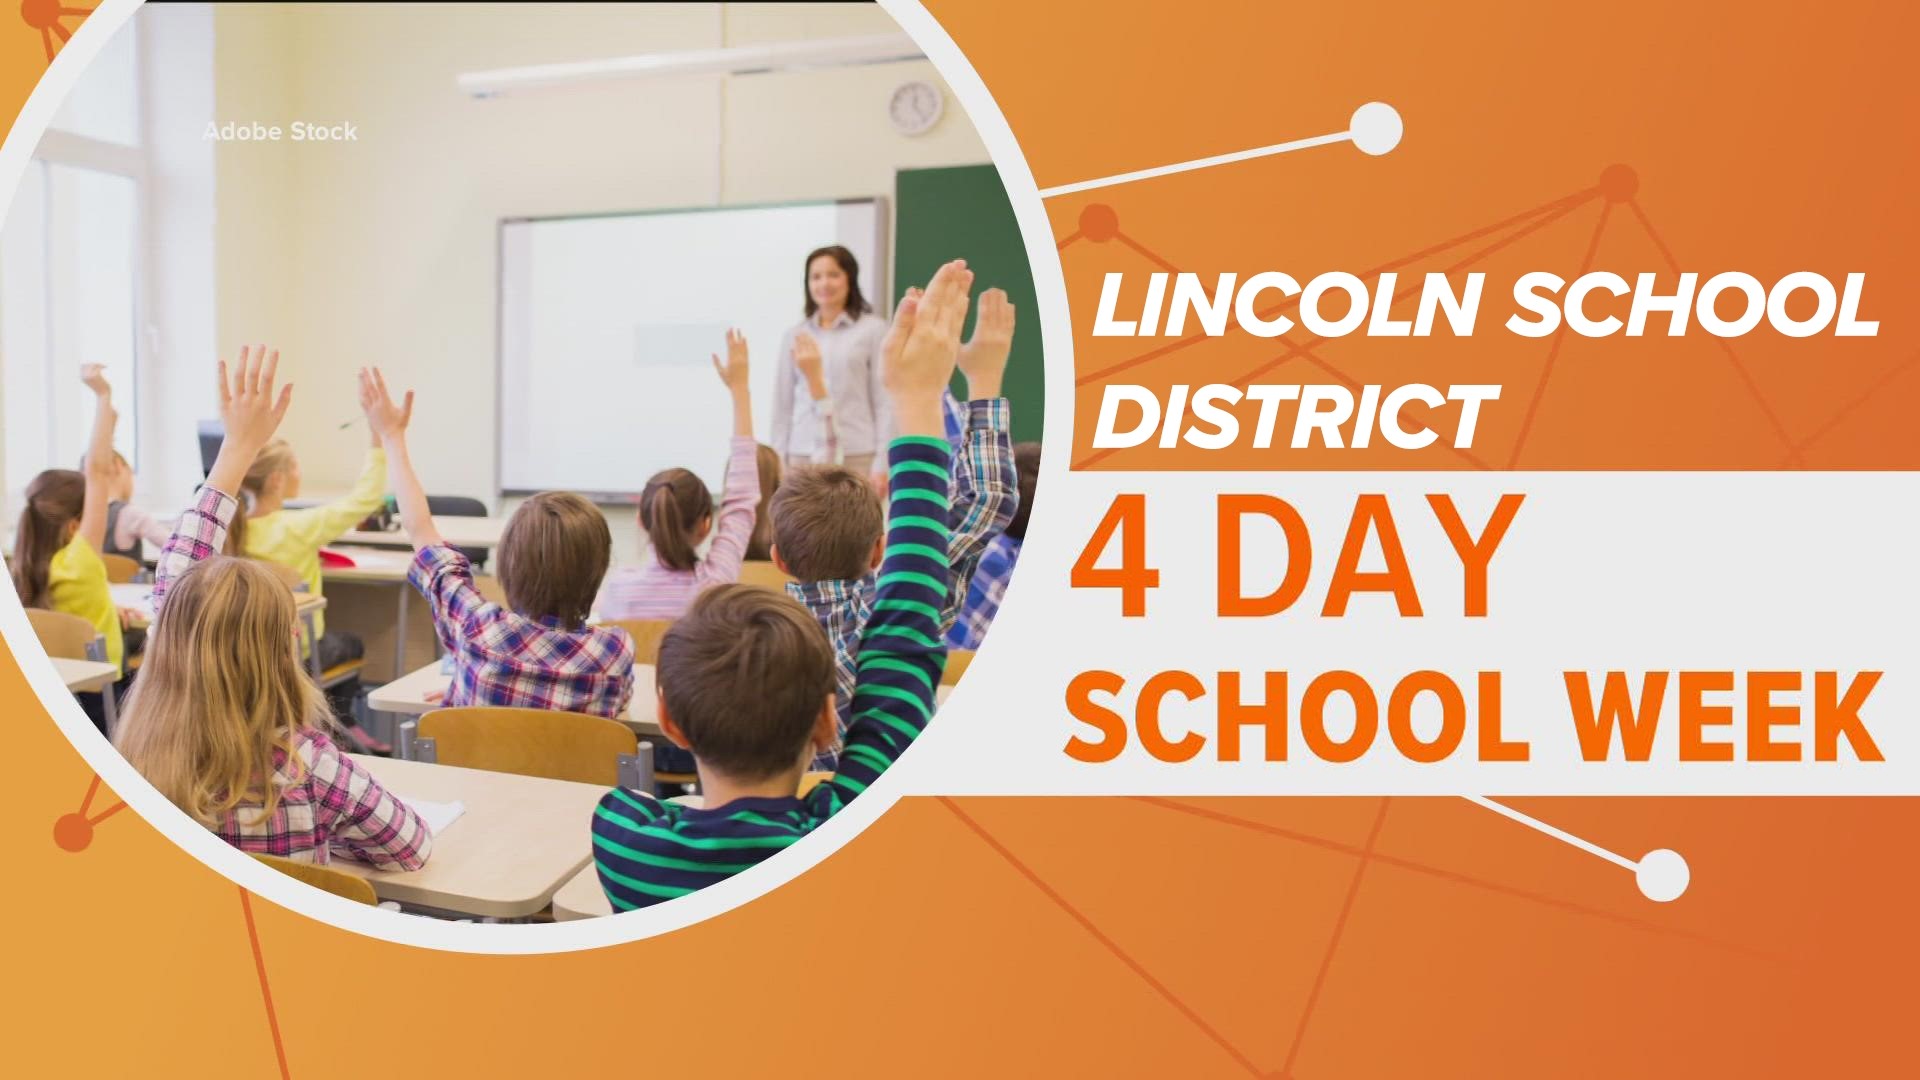 The Lincoln School District has voted unanimously to keep Monday free for extracurricular activities, or simple rest days.